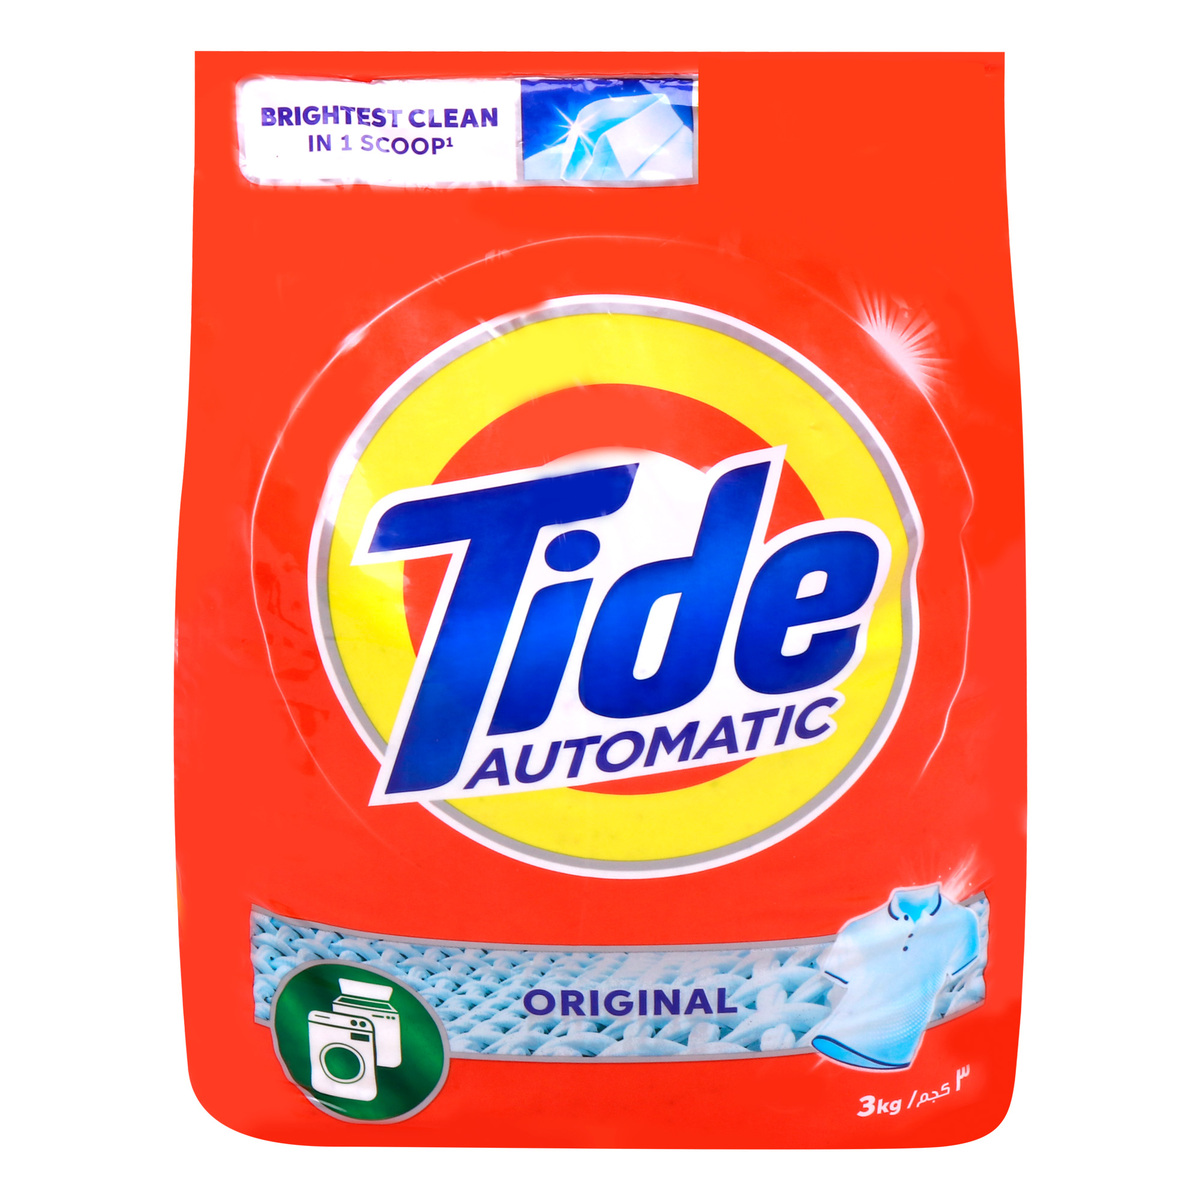 Buy Tide Automatic Powder Laundry Detergent Original Scent Value Pack 3 kg Online at Best Price | Front load washing powders | Lulu UAE in UAE